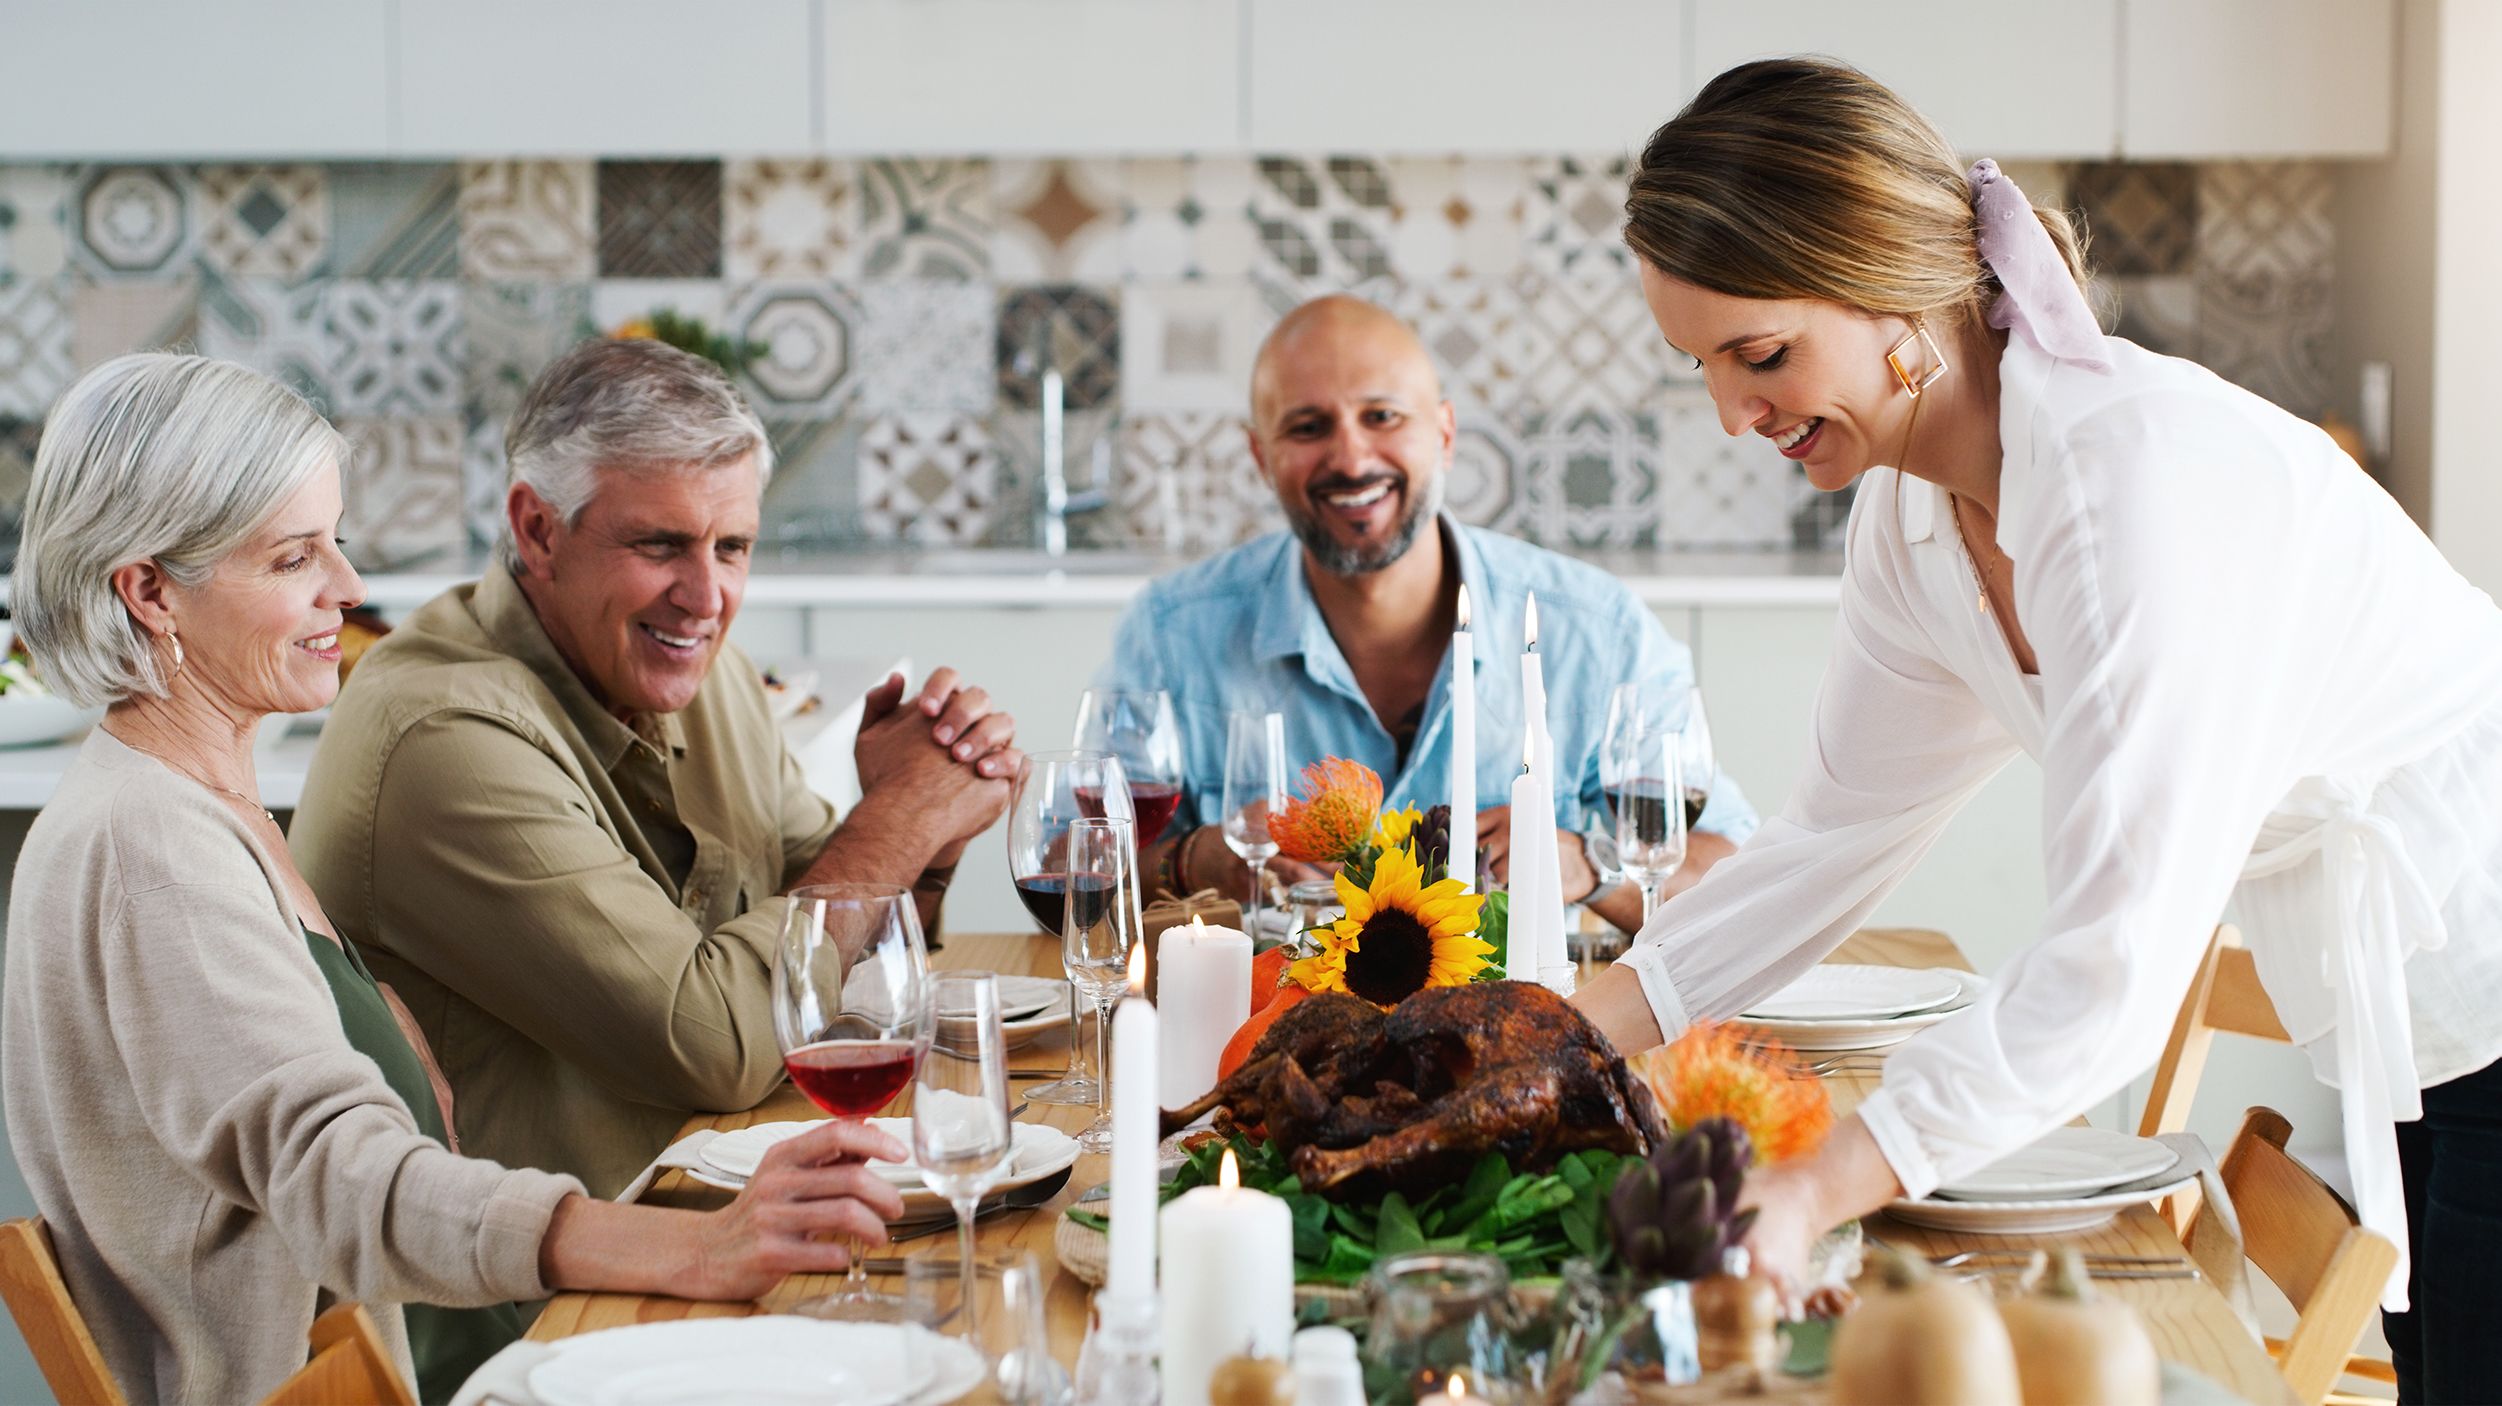 Hosting Thanksgiving this year? These 22 essentials will be lifesavers | CNN